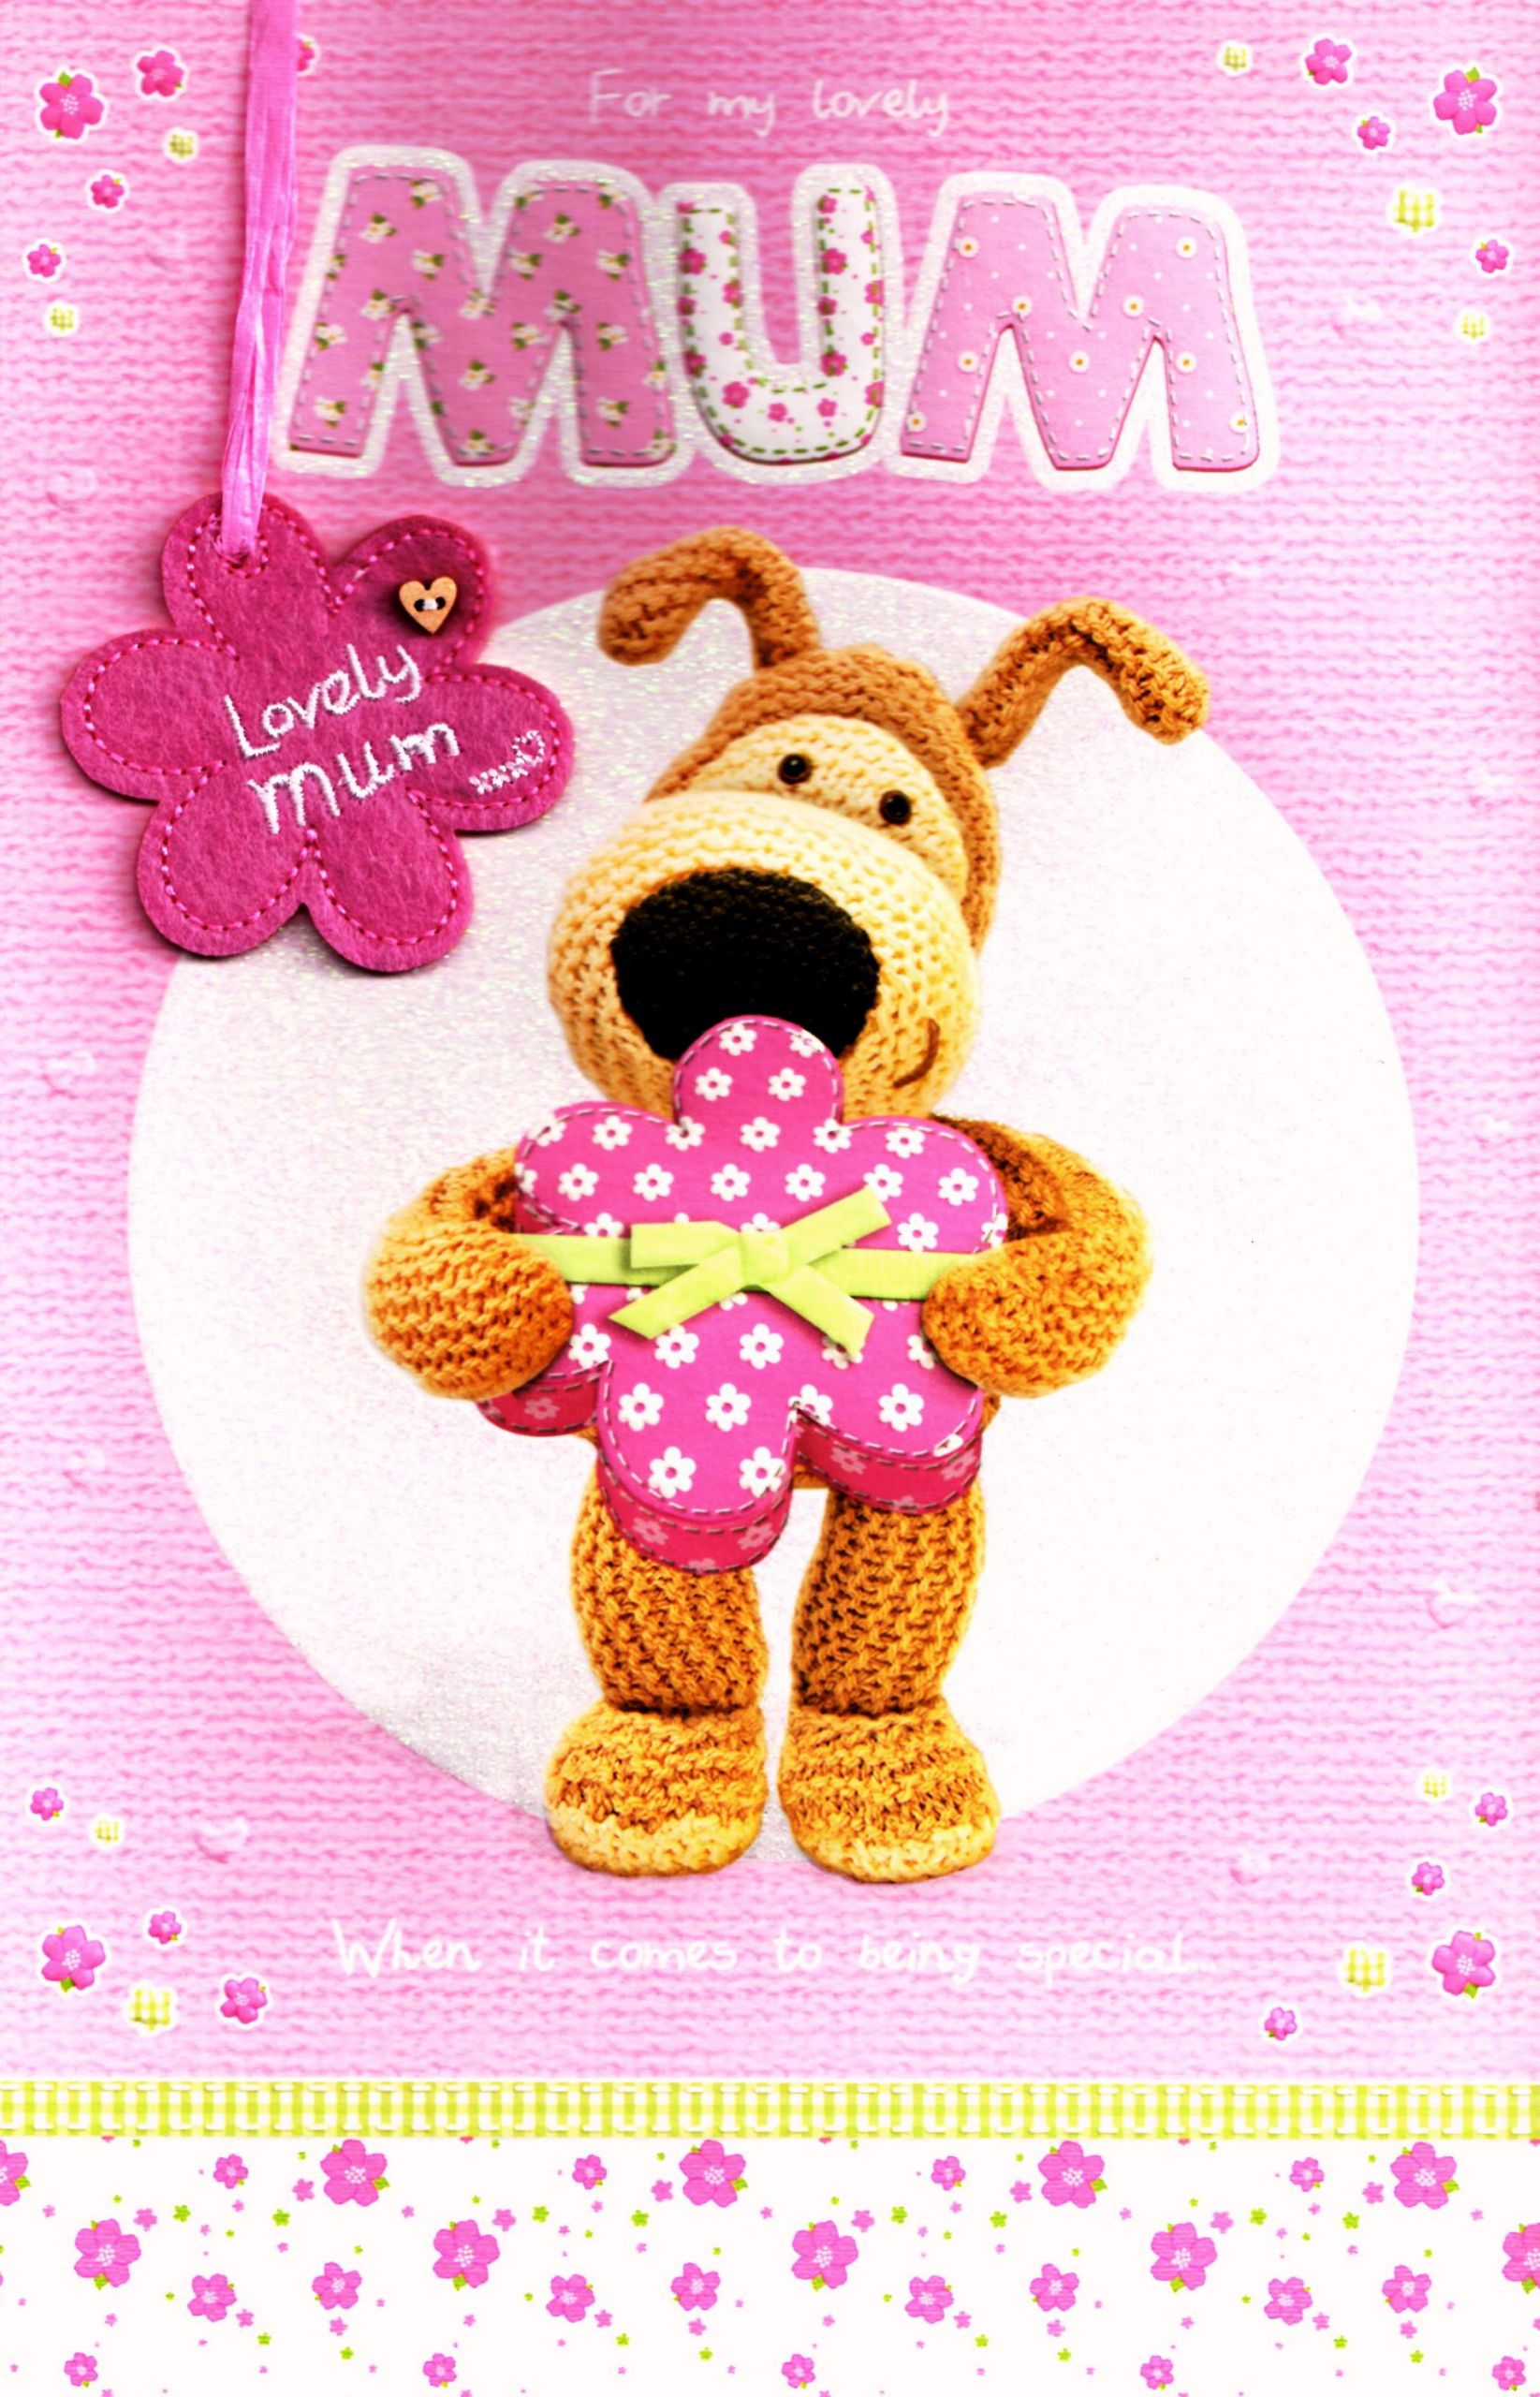 Mother's Day Photo Ideas
 Boofle For My Lovely Mum Happy Mother s Day Card